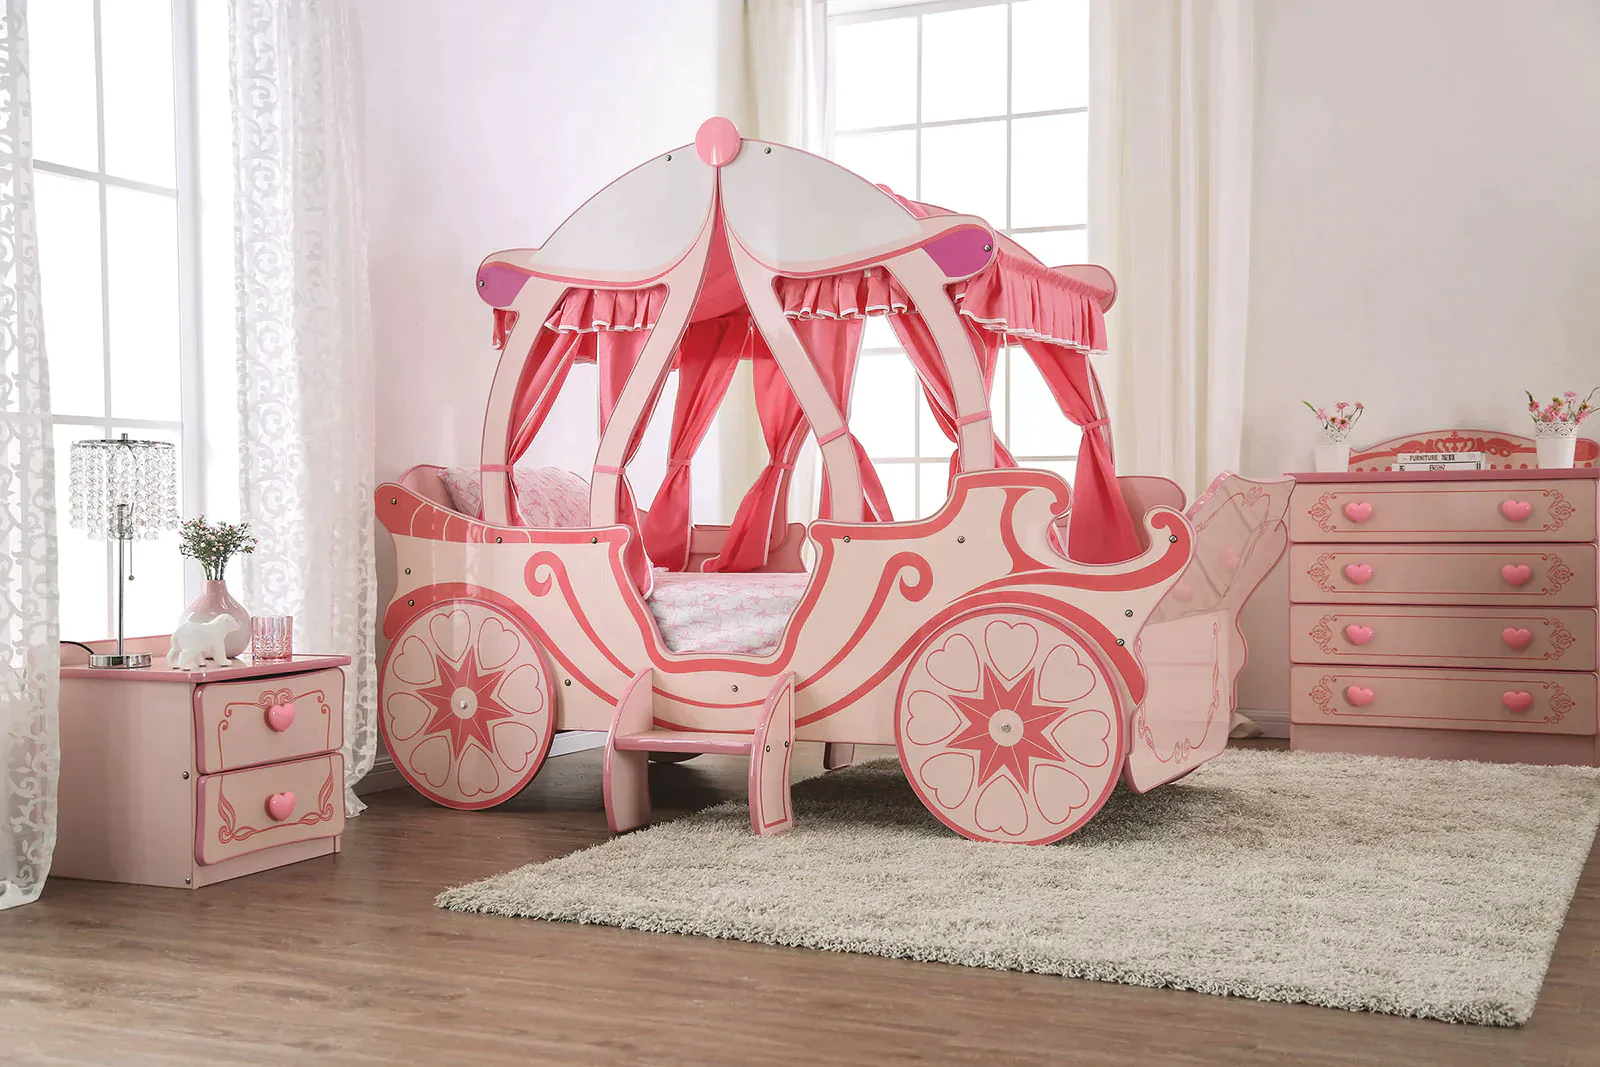 CM7630 Hokku designs Arianna pink / light pink canopy style princess carriage design twin size kids bed. ***Memorial Day Sale Going On Now*** Discounted Price When You Add To Cart up to 35% off. Click Acima Leasing Easy Lease and Application Process at ambfurniture.com